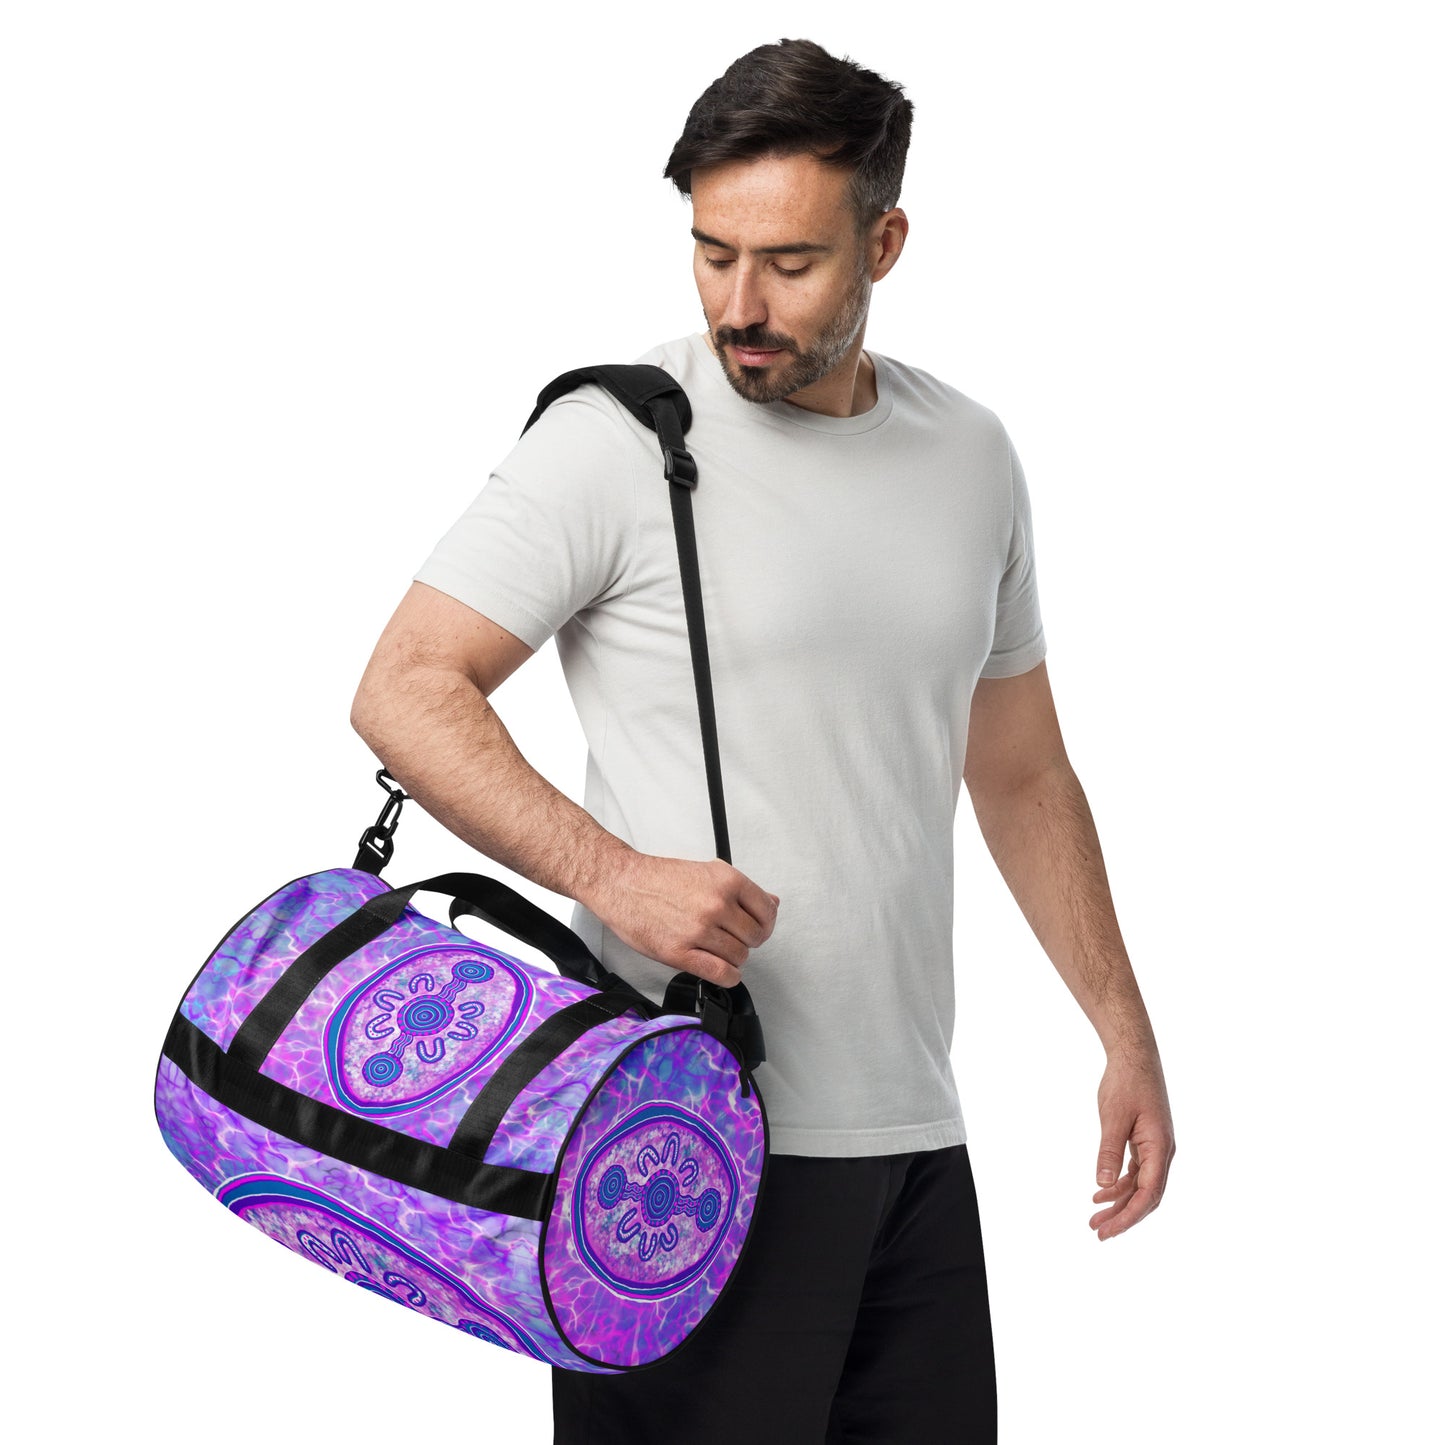 Purple Water Dreaming All-over print gym bag